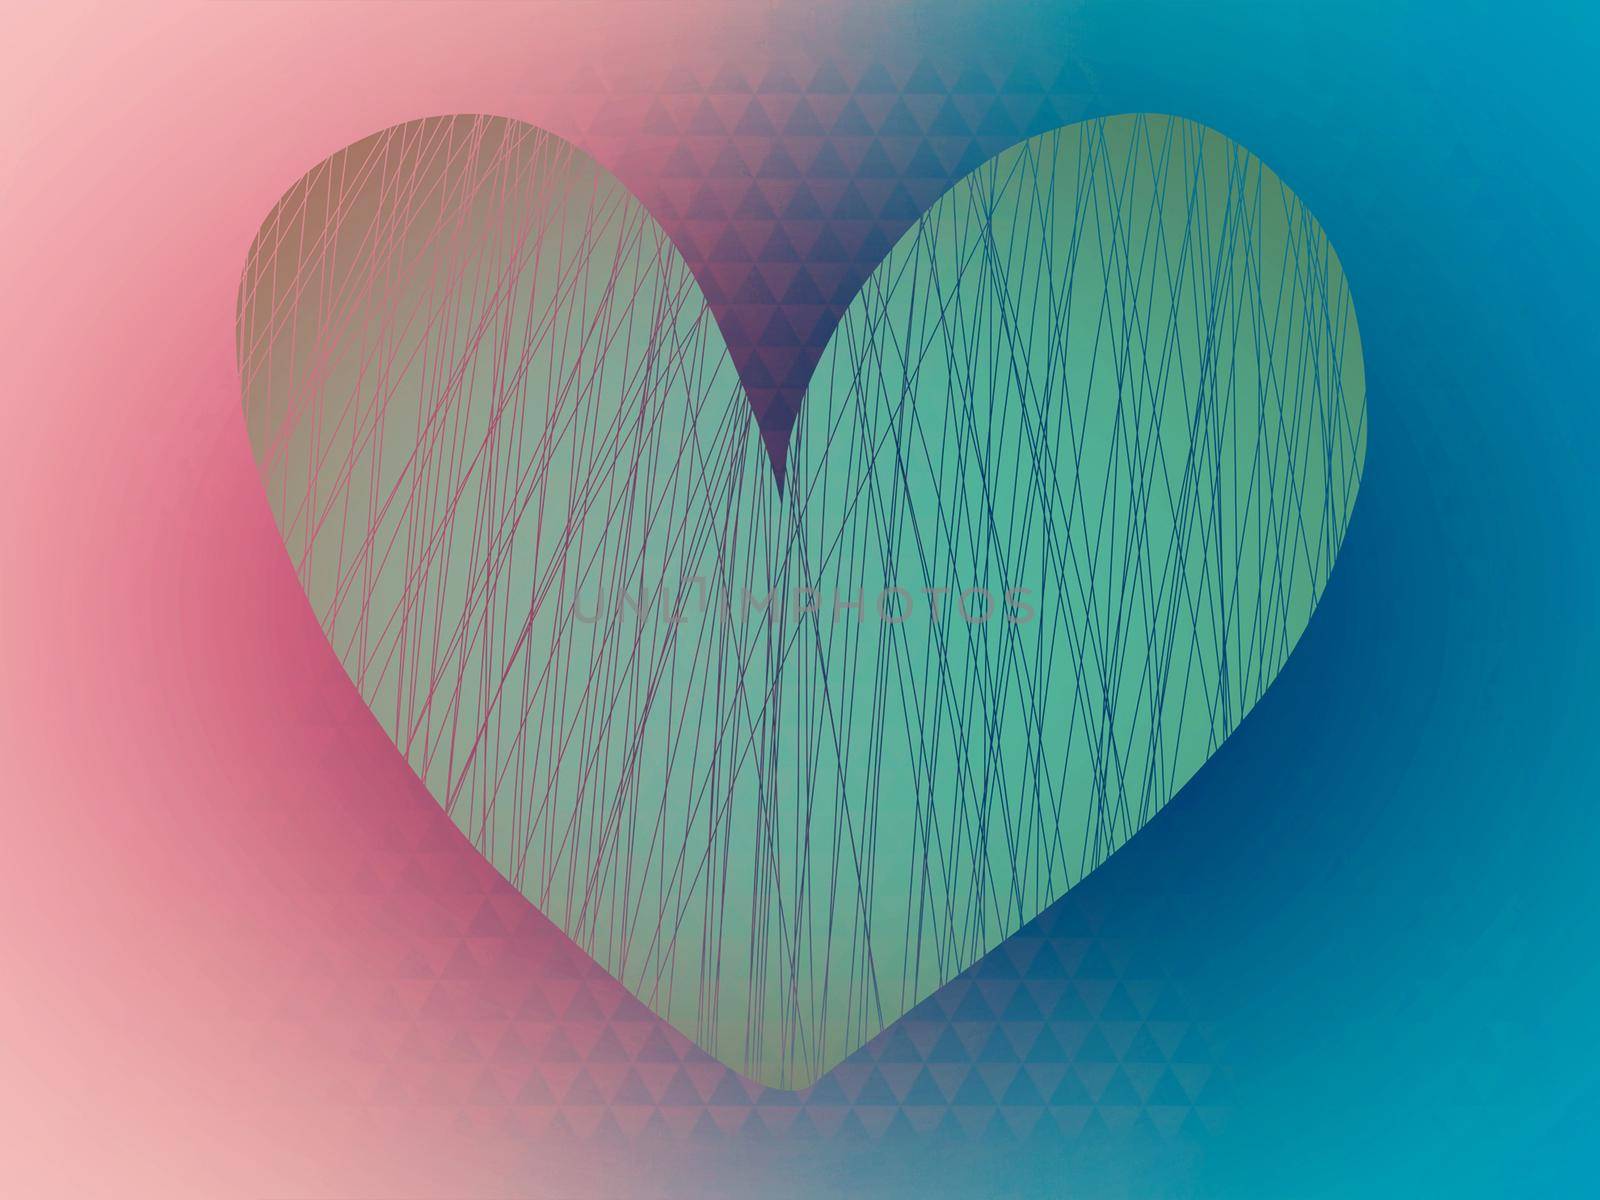 Cute heart on white and blue abstract background illustration by Yoopho